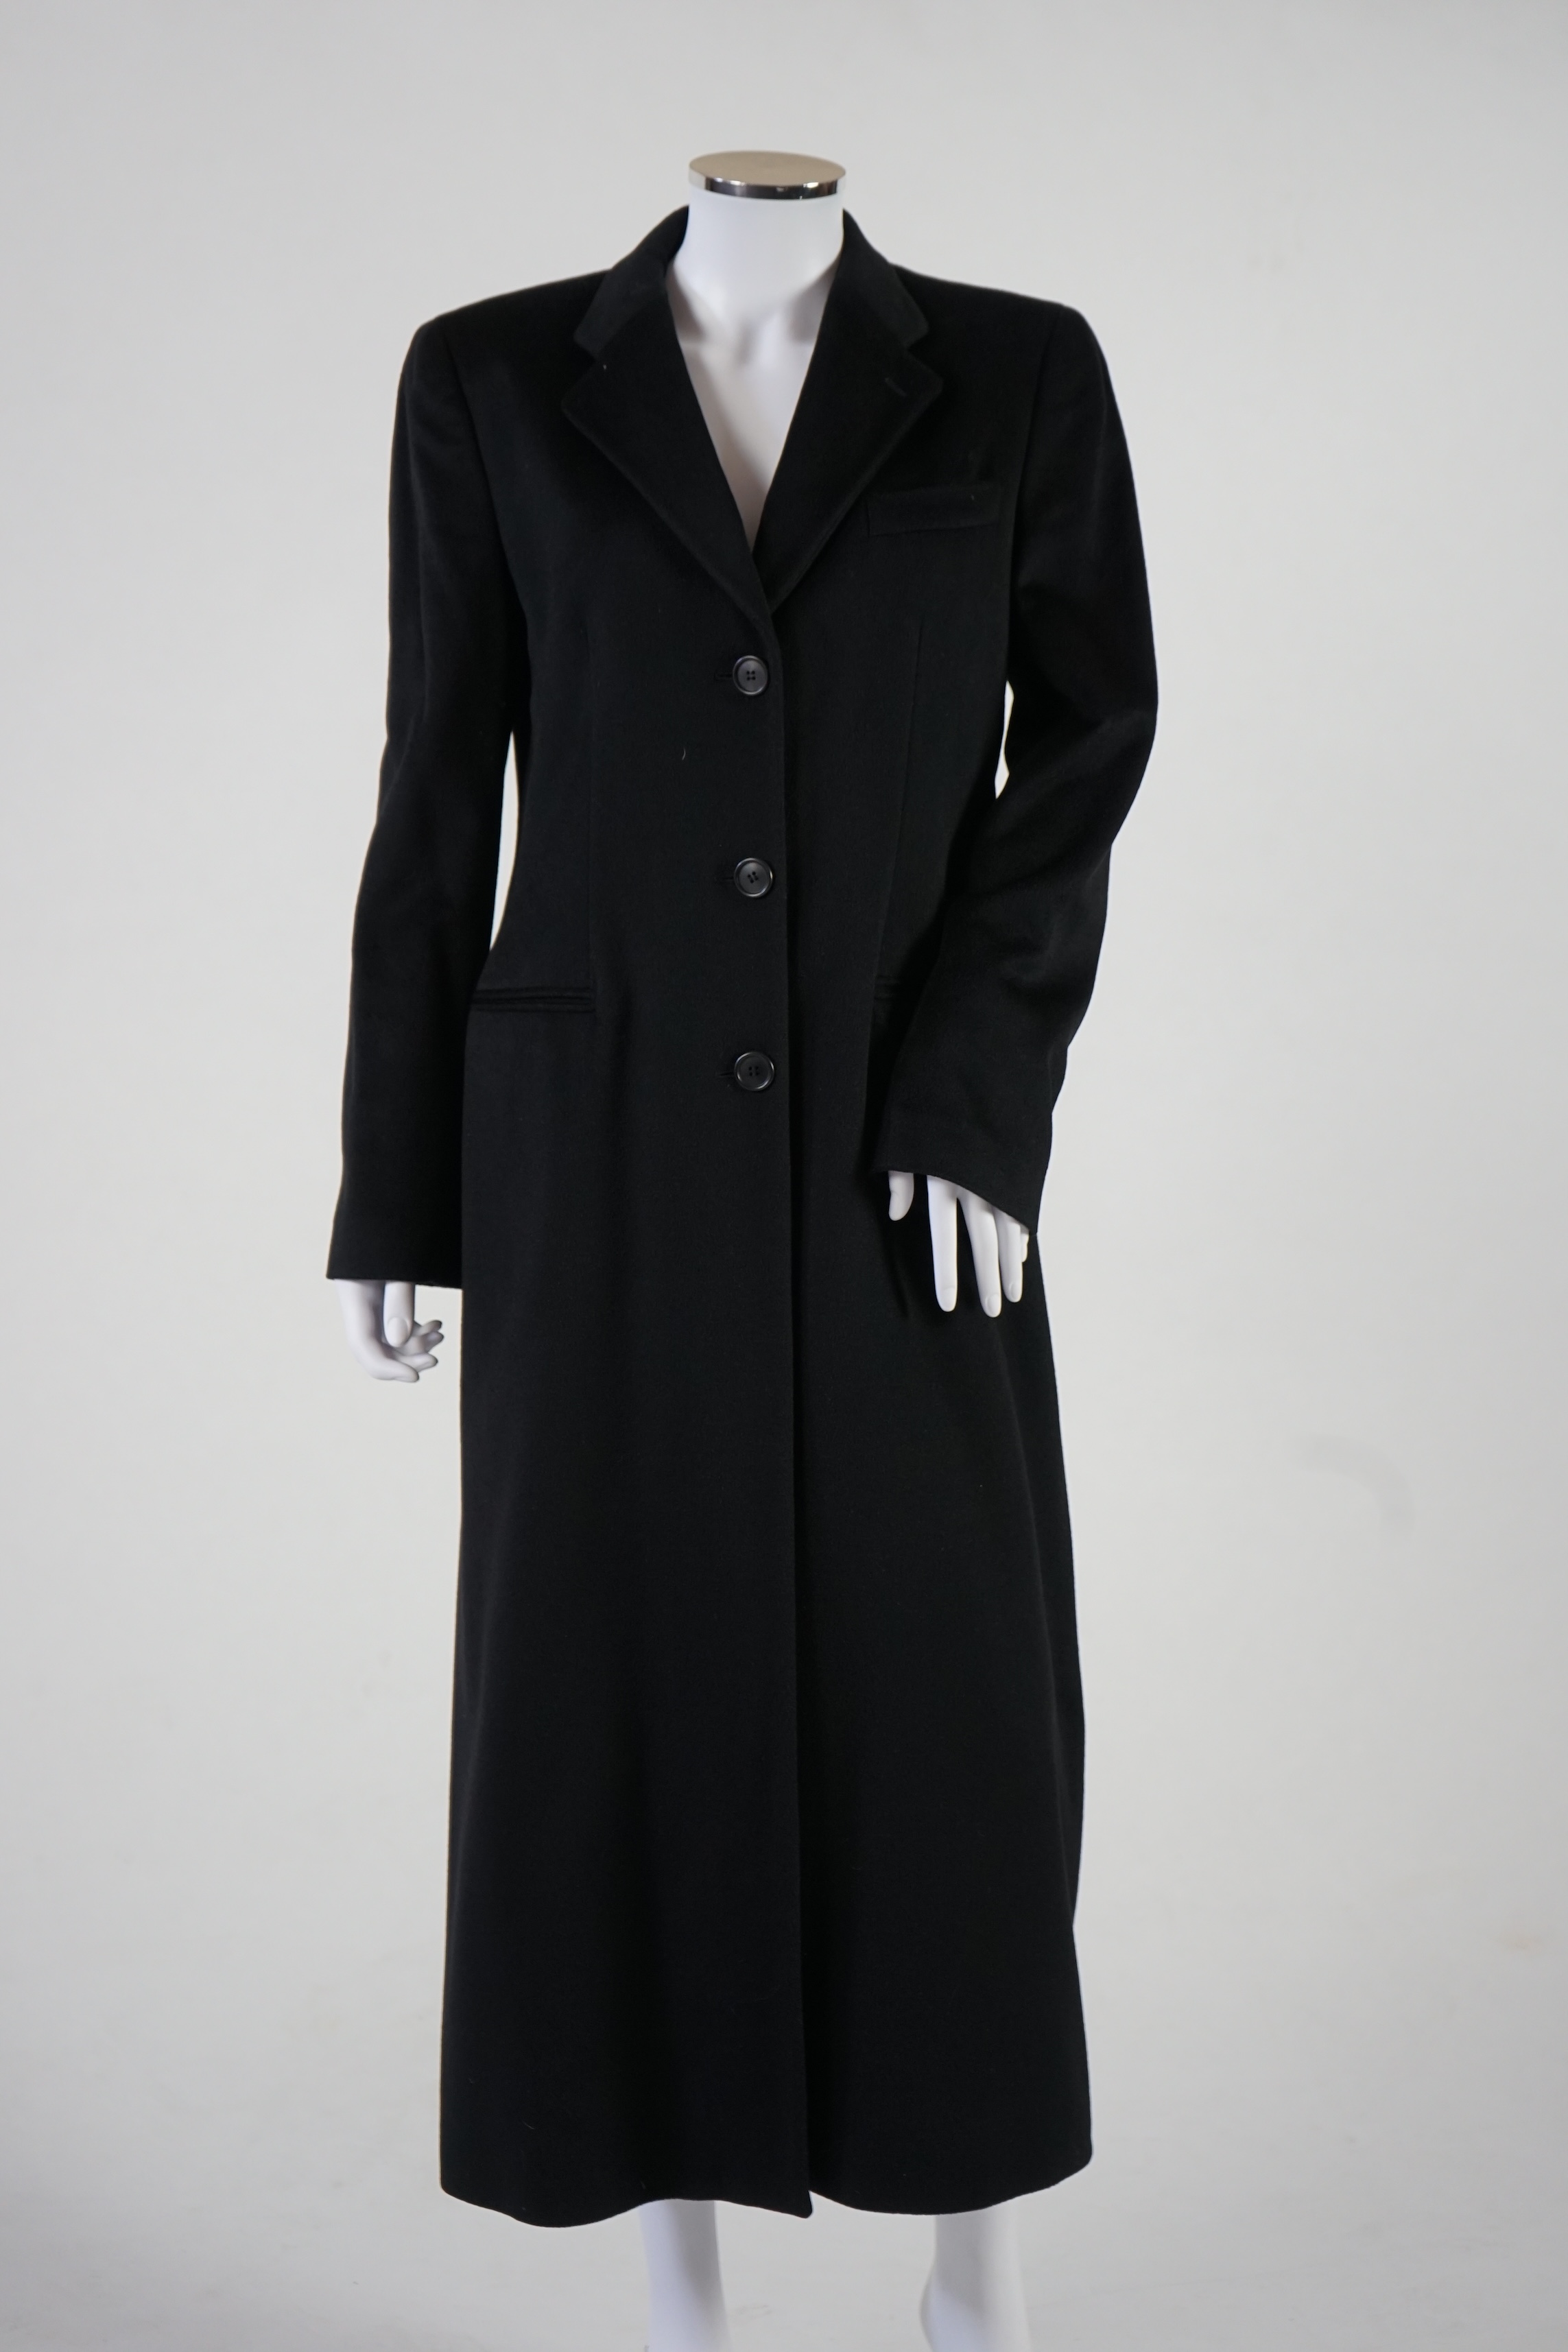 A Georgio Armani Classico lady's black cashmere long coat. Proceeds to Happy Paws Puppy Rescue